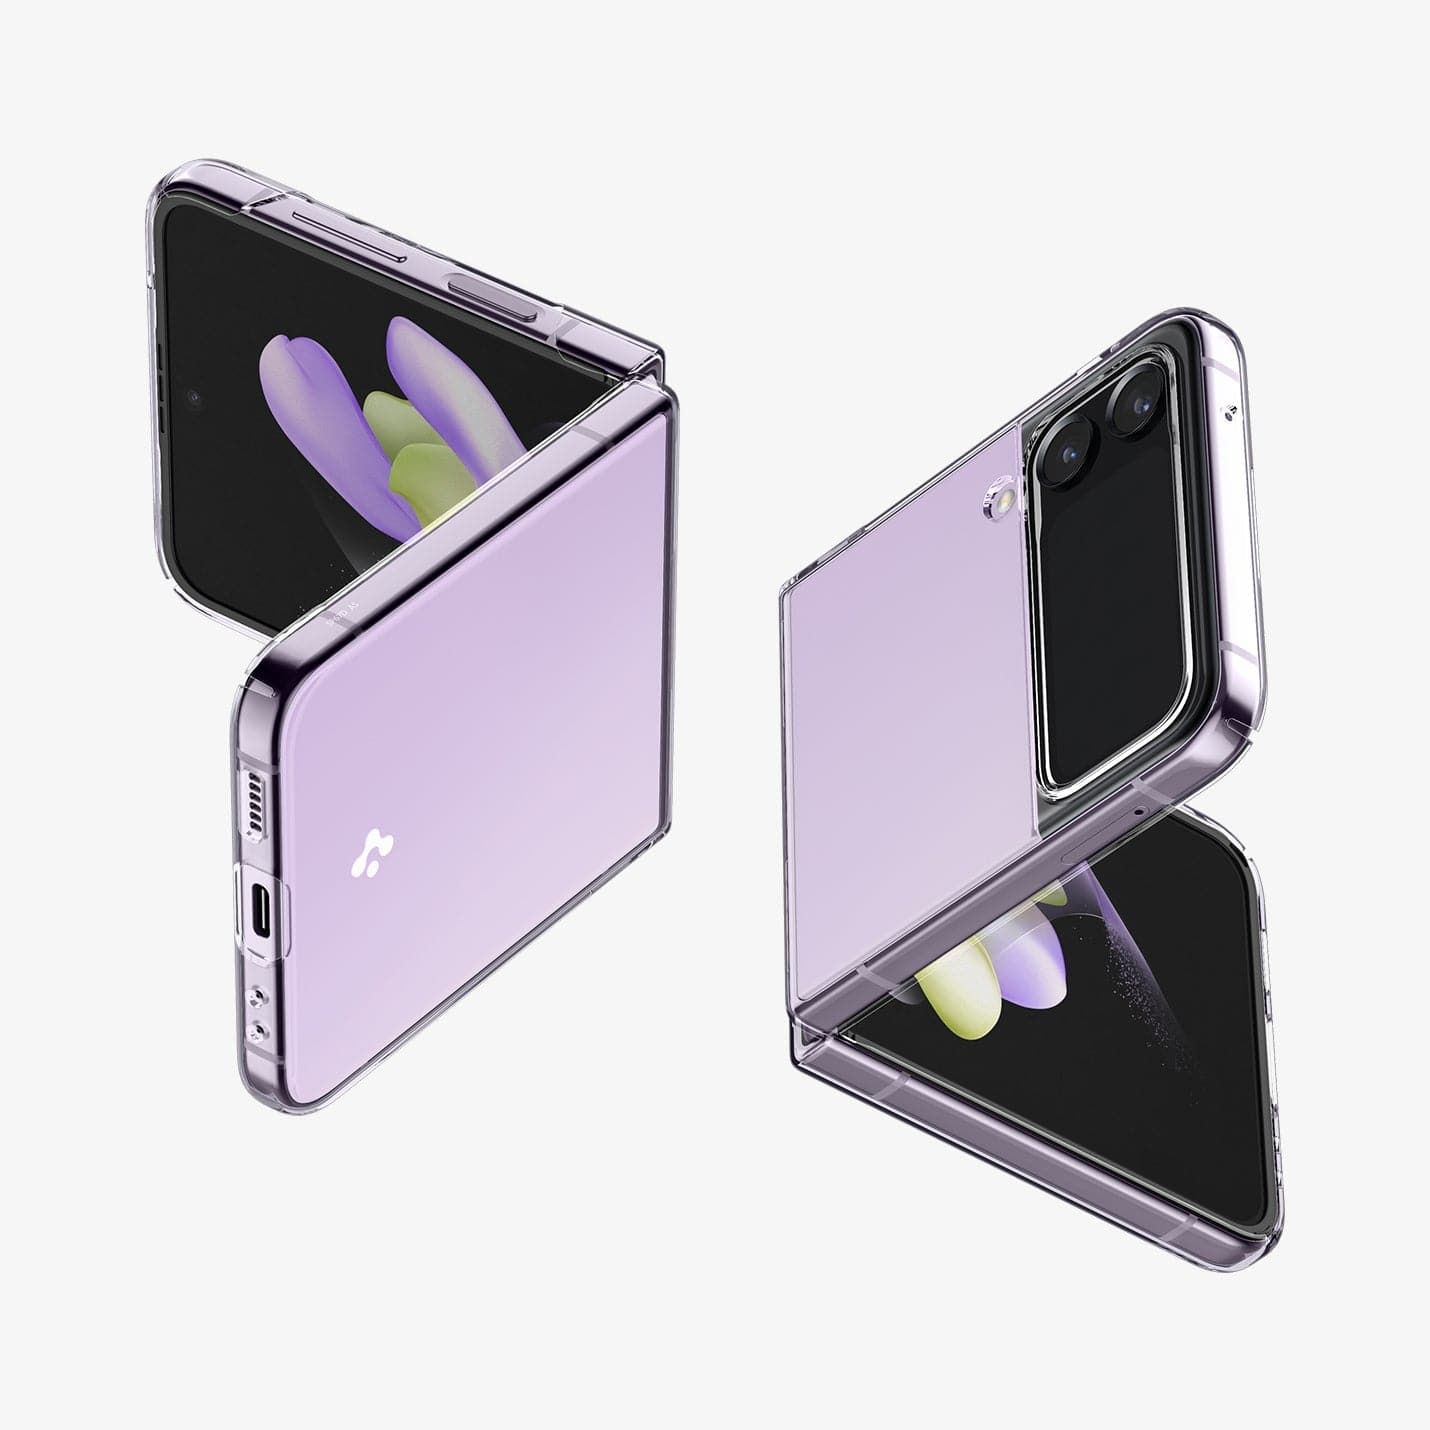 ACS05112 - Galaxy Z Flip 4 Case AirSkin in crystal clear showing the back, side and partial front of two devices